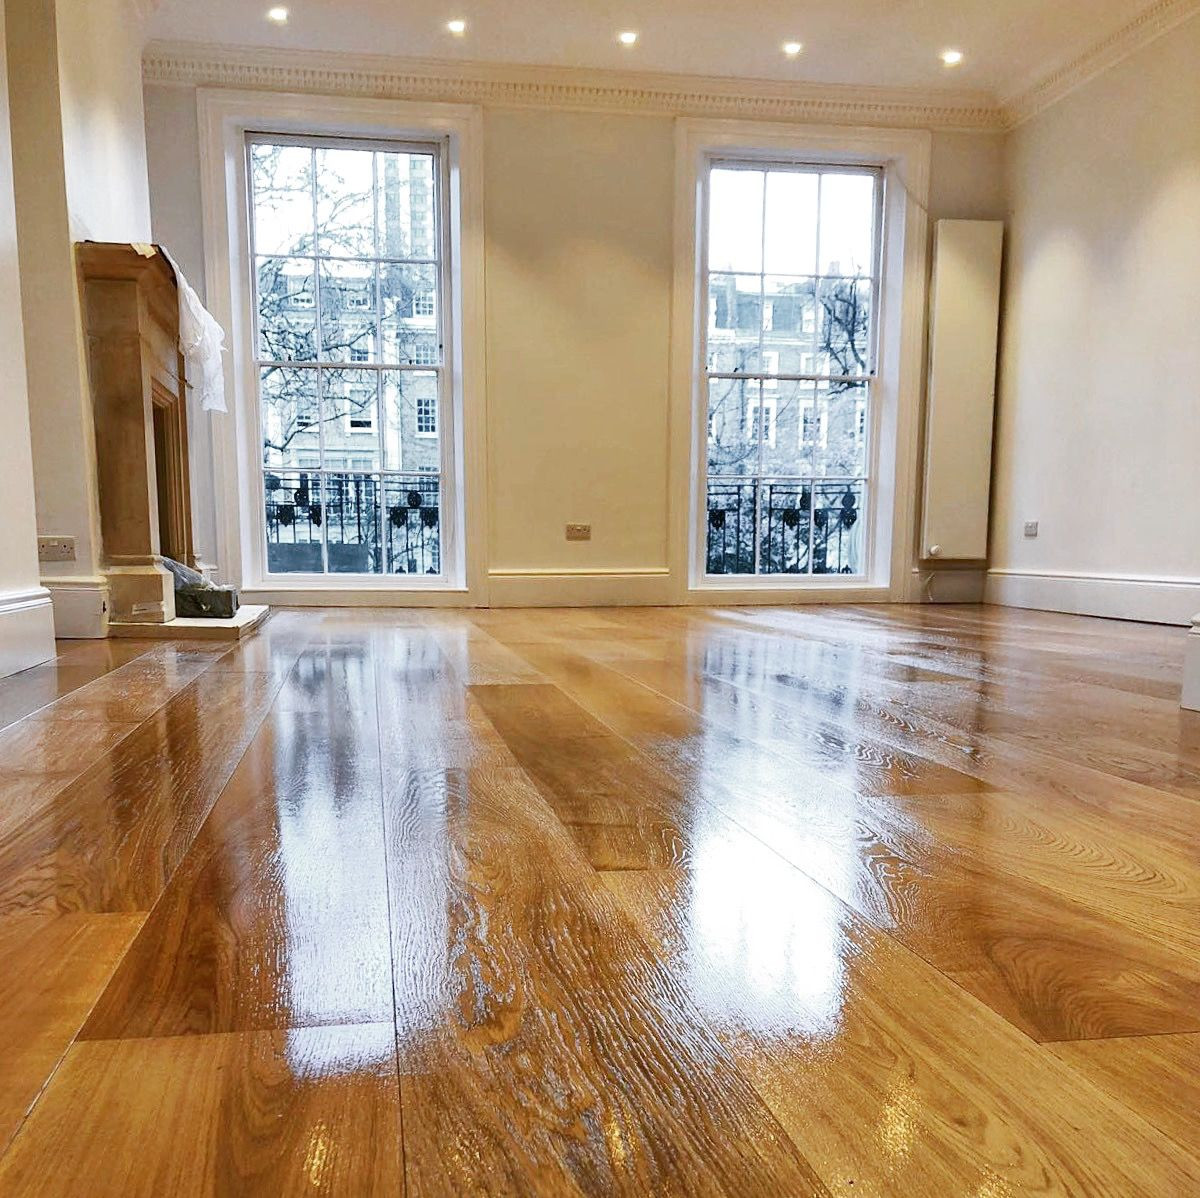 28 Spectacular Gaps In Prefinished Hardwood Flooring 2024 free download gaps in prefinished hardwood flooring of all things shiny ac29cc2a8 check out these freshly hardwaxed floors with regard to all things shiny ac29cc2a8 check out these freshly hardwaxed floor